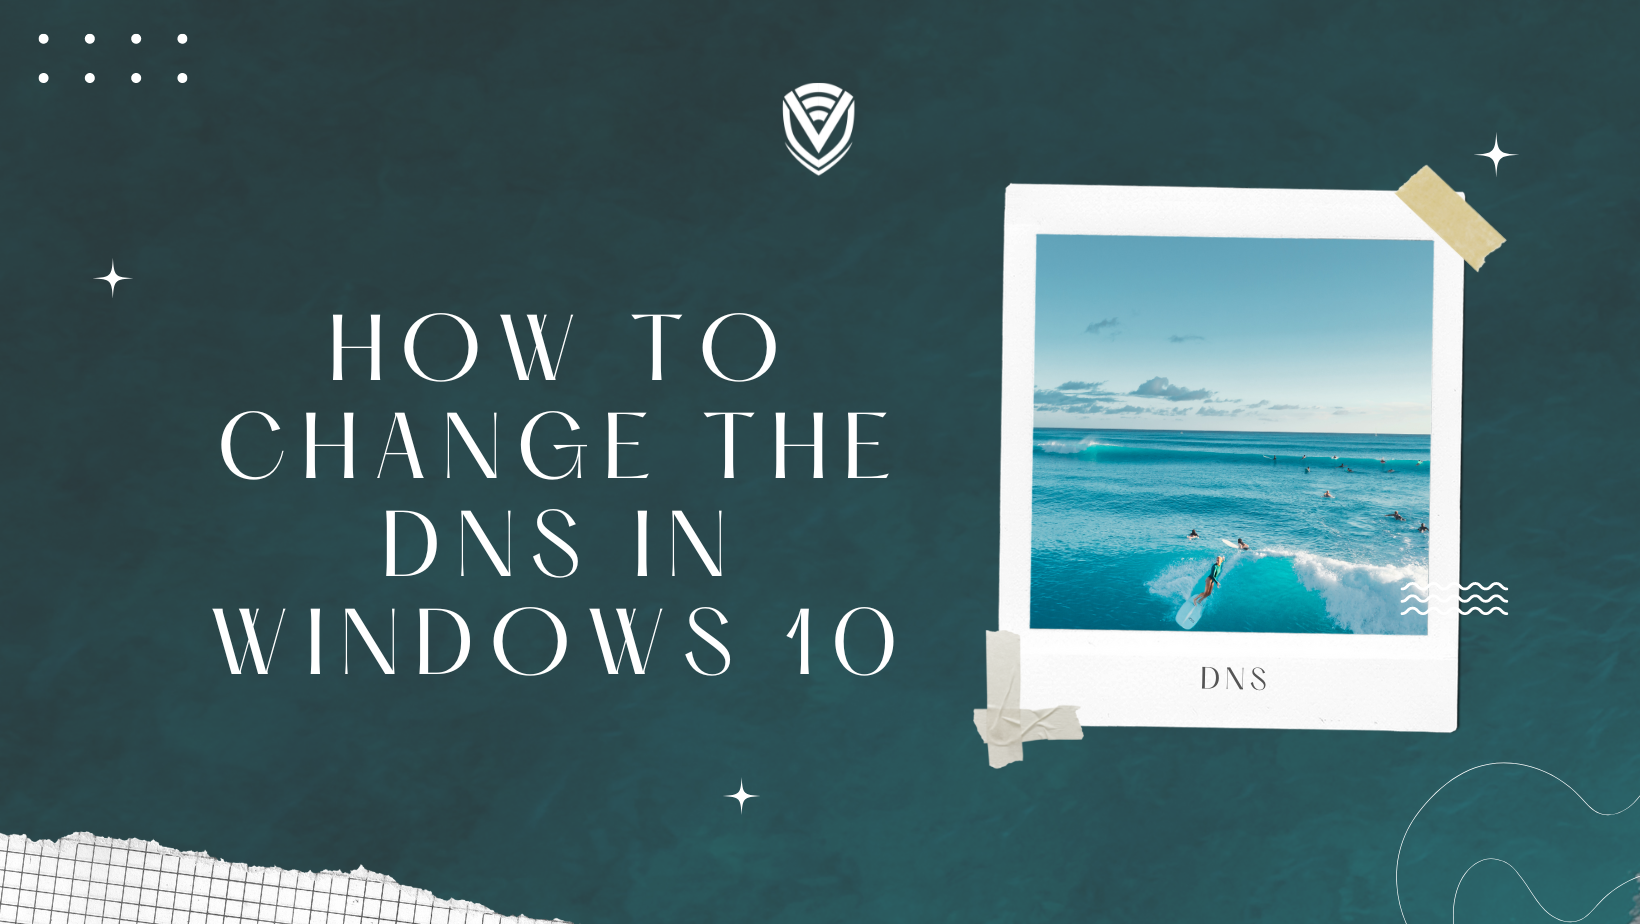 How To Change The DNS In Windows 10